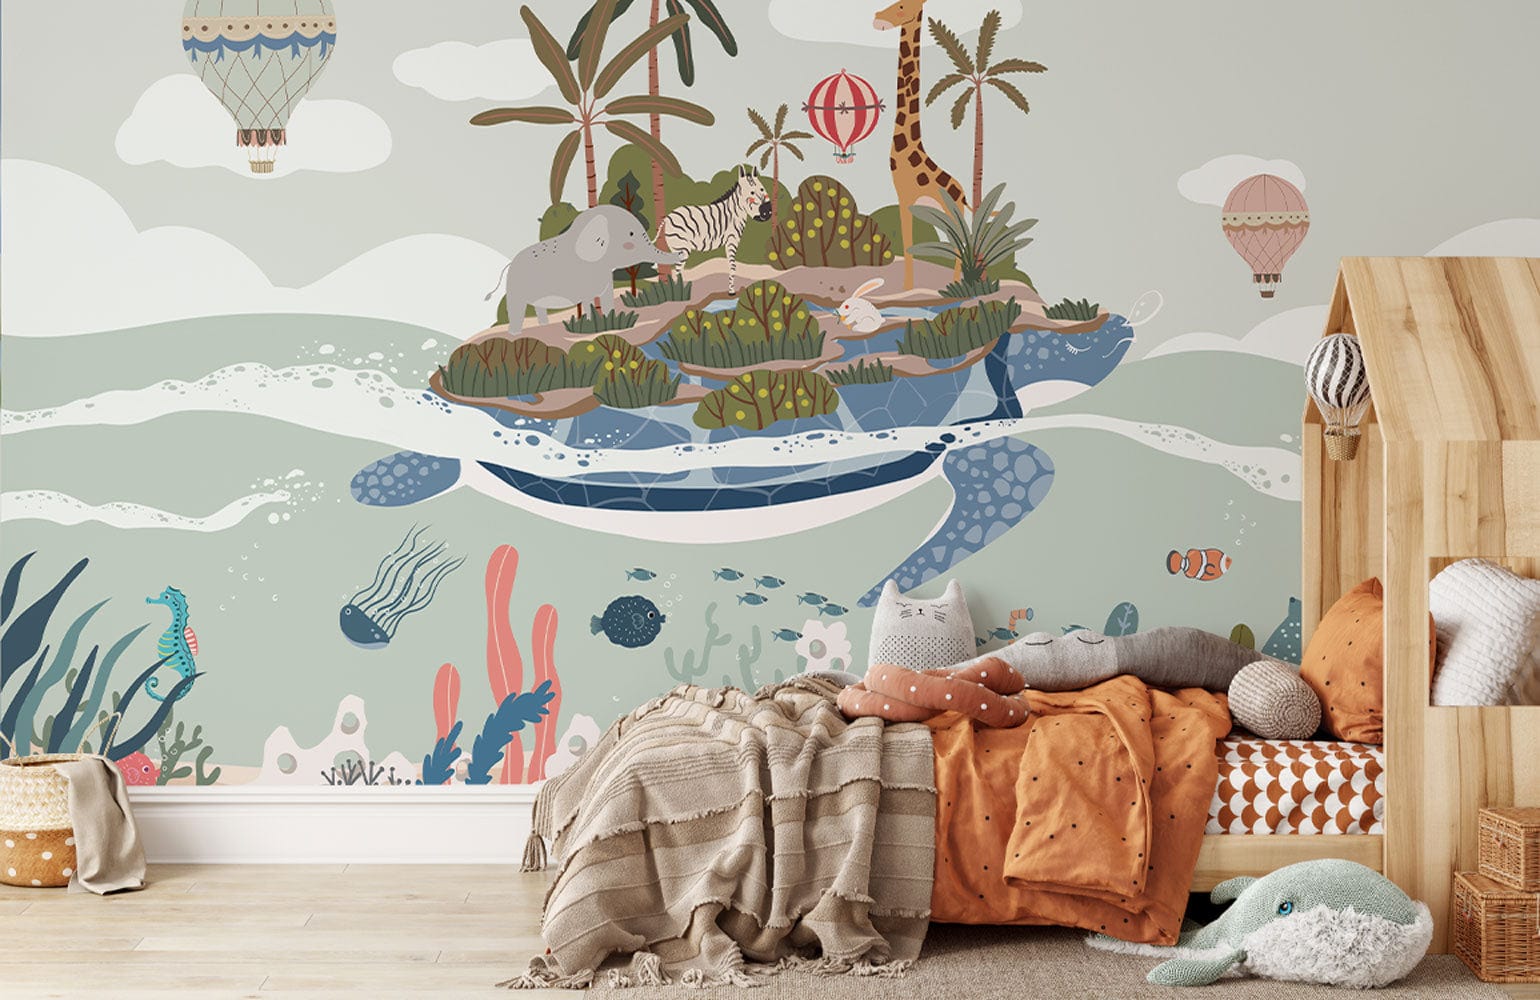 Wallpaper mural of a turtle island for use in the decoration of children's bedrooms